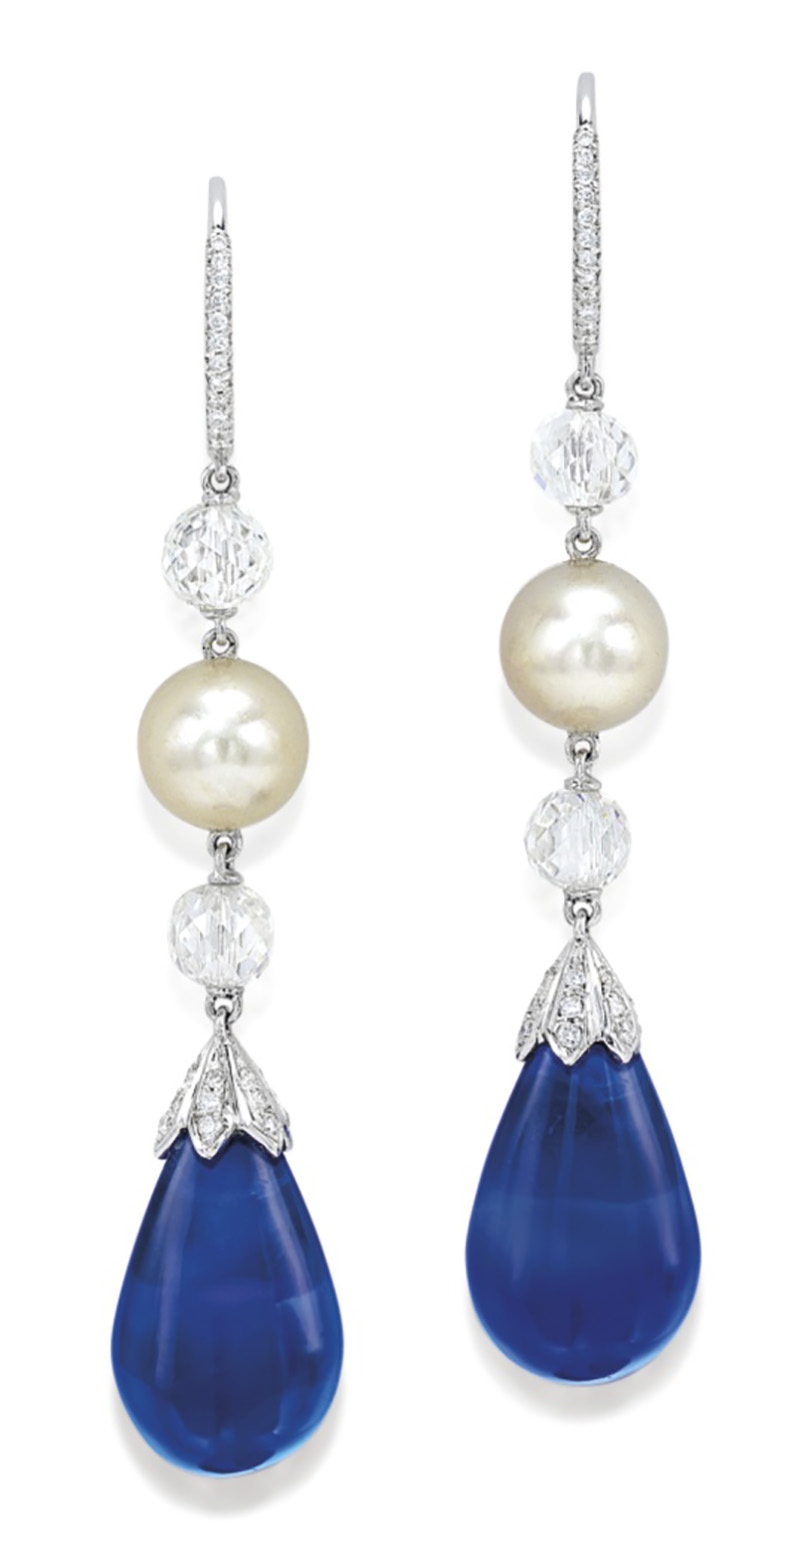  LOT 1889 - A UNIQUE PAIR OF SAPPHIRE, PEARL AND DIAMOND PENDENT EARRINGS